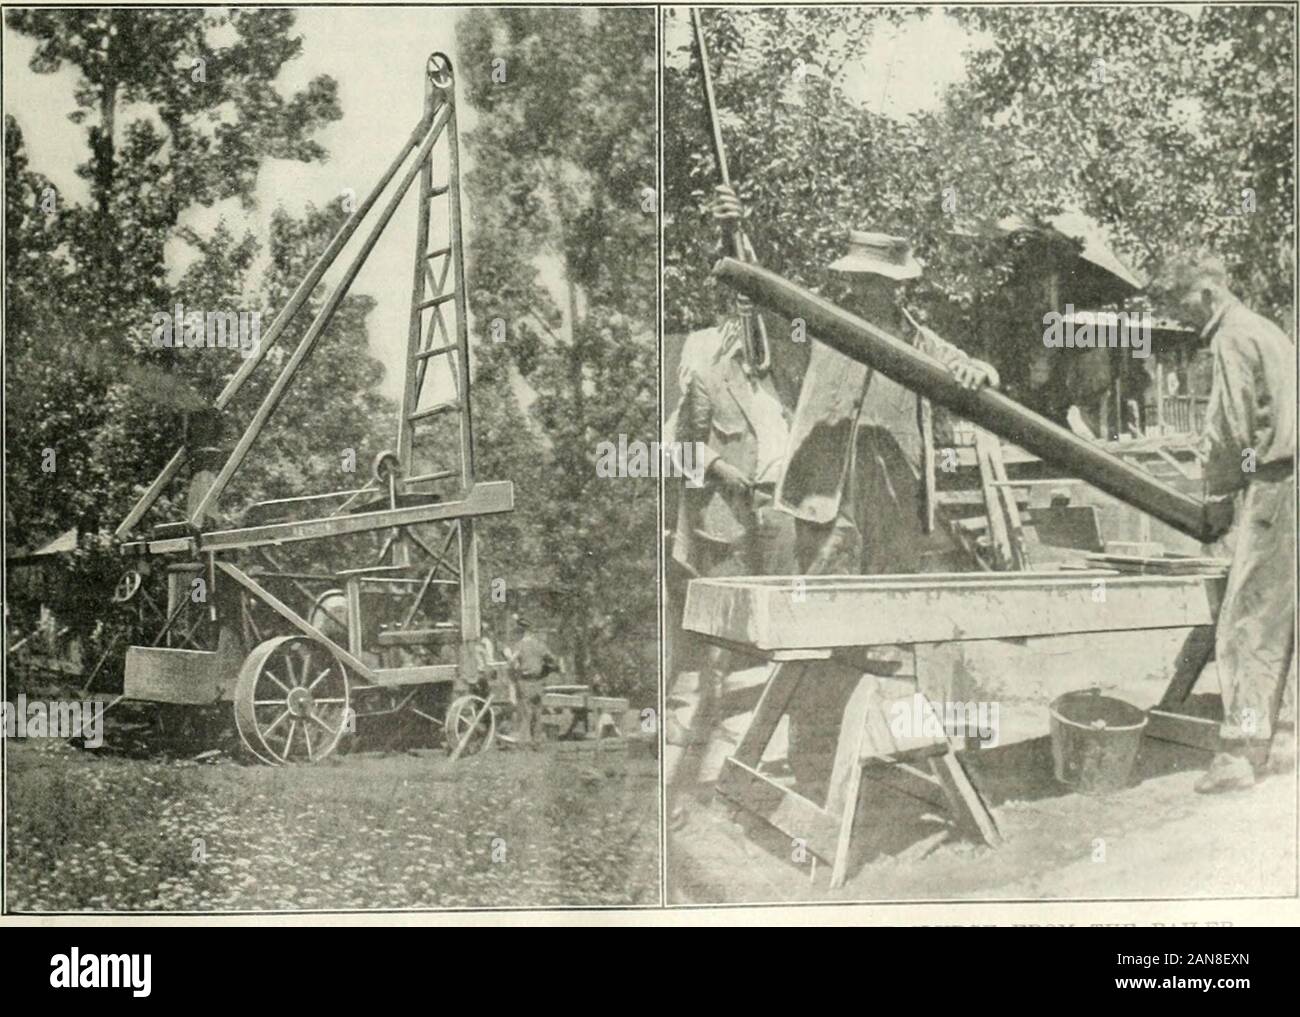 E/MJ : engineering and mining journal . HEADFRAME AT THE HOLMES MINE OP THE CLEVELAND-CLIFFS IRON CO., [SHPEMINl MICH. The headframe is l.r,0 ft. high over all, anil is the highest on th It will have three crushers in It and is designed to crush and handle hoth hard and so t Olwill be 77 ft. high and will cany the No. 8 gyratory crusher, i ? The head-frame will be enclosed cm Hie working Hours. Theshafi has Foui partments, and will bi equipped with two skips and a cage.. A KEYSTONE DRILL PROSPECTING IN CALIFORNIA 832 ENGINEERING AND MINING JOURNAL Vol. 102, No. 19 niniin iii:!uiii!iuiiiuiiiiii Stock Photo